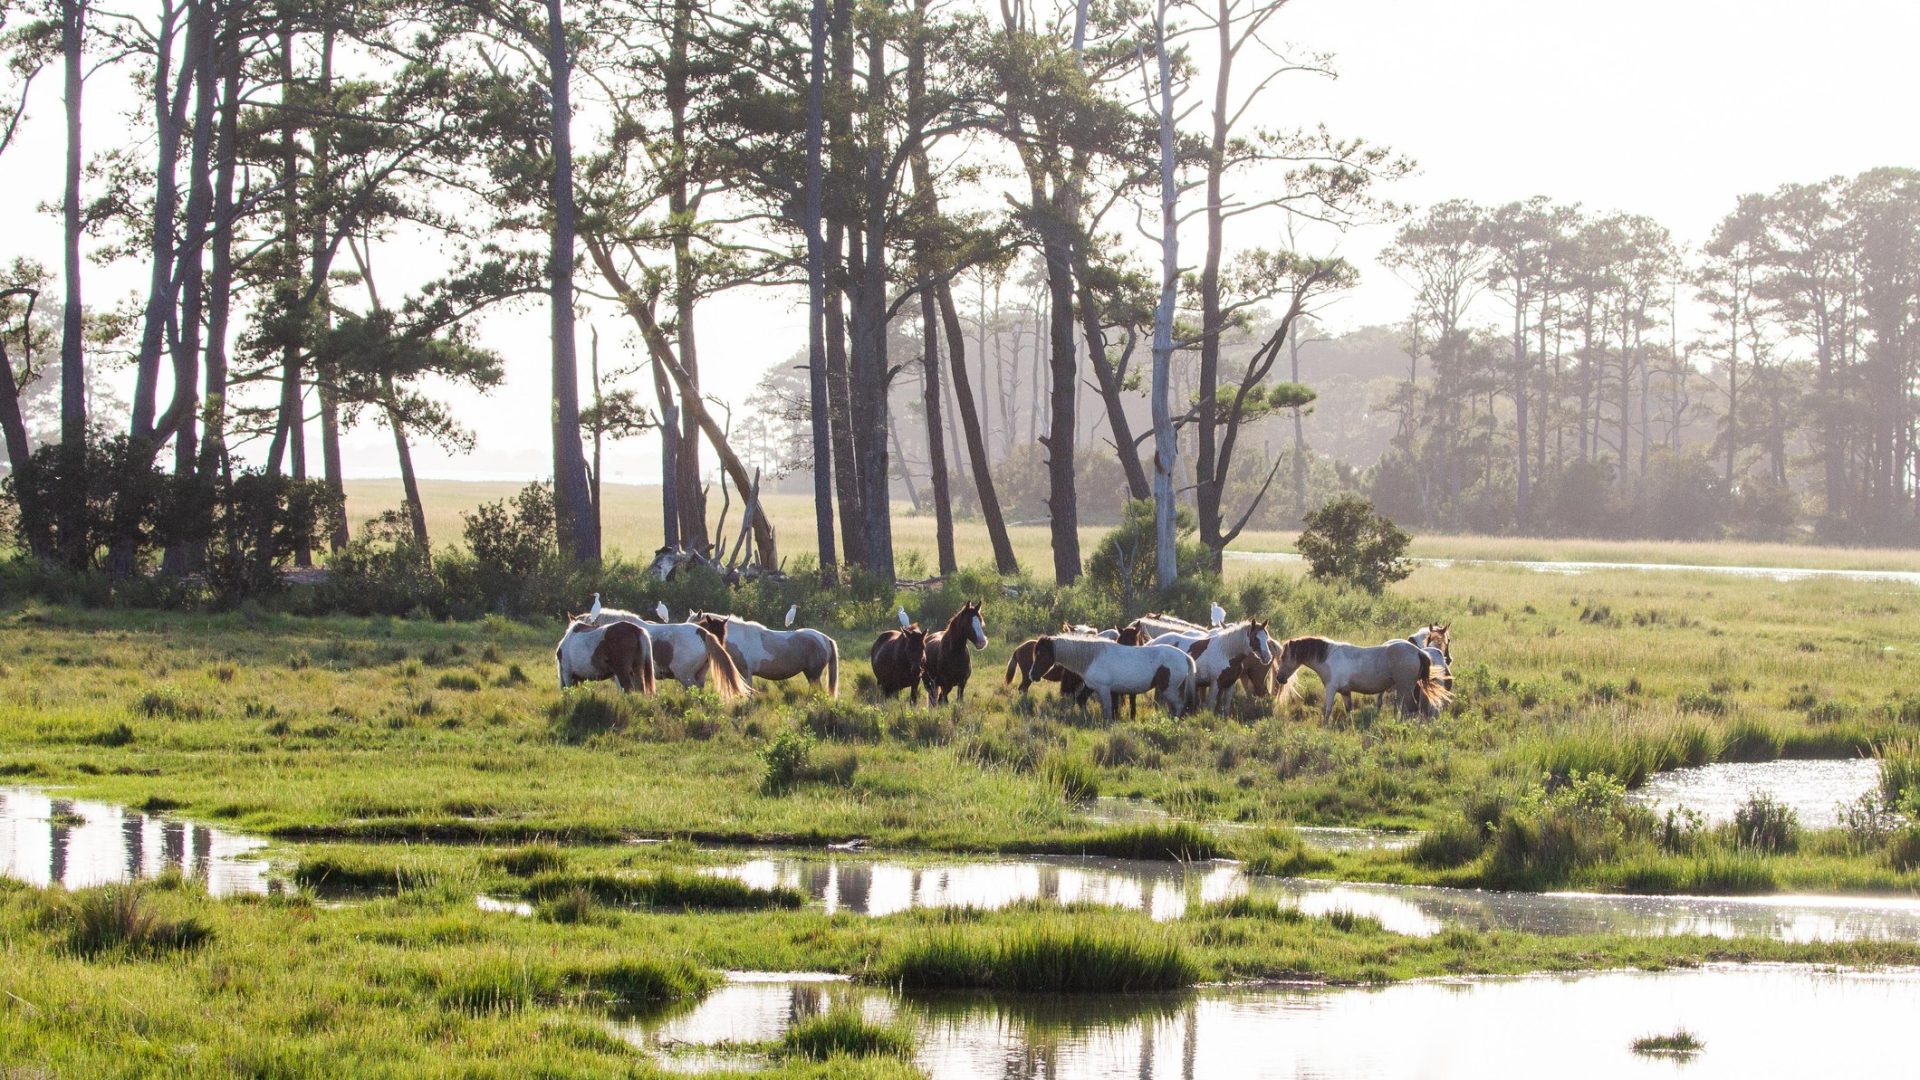 <p><strong>Price:</strong> From $699</p> <p>If days filled with ecology, history, wildlife watching, art and aquaculture sounds ideal, you'll love this vacation package.</p> <p>This four-day, three-night trip to the East Coast includes a bus tour highlighting the history of Chincoteague Island, walking along the Assateague National Seashore and traveling up the Assateague Chanel by pontoon boat. Other highlights include visiting Chincoteague National Wildlife Refuge for sightings of wild ponies and observing the techniques of a local wildlife artist.</p> <p>This trip also includes three breakfasts, two lunches and three dinners. Book <a href="https://www.roadscholar.org/find-an-adventure/10545/island-adventure-discover-chincoteague-and-assateague-islands" rel="noreferrer noopener">here</a>. </p>